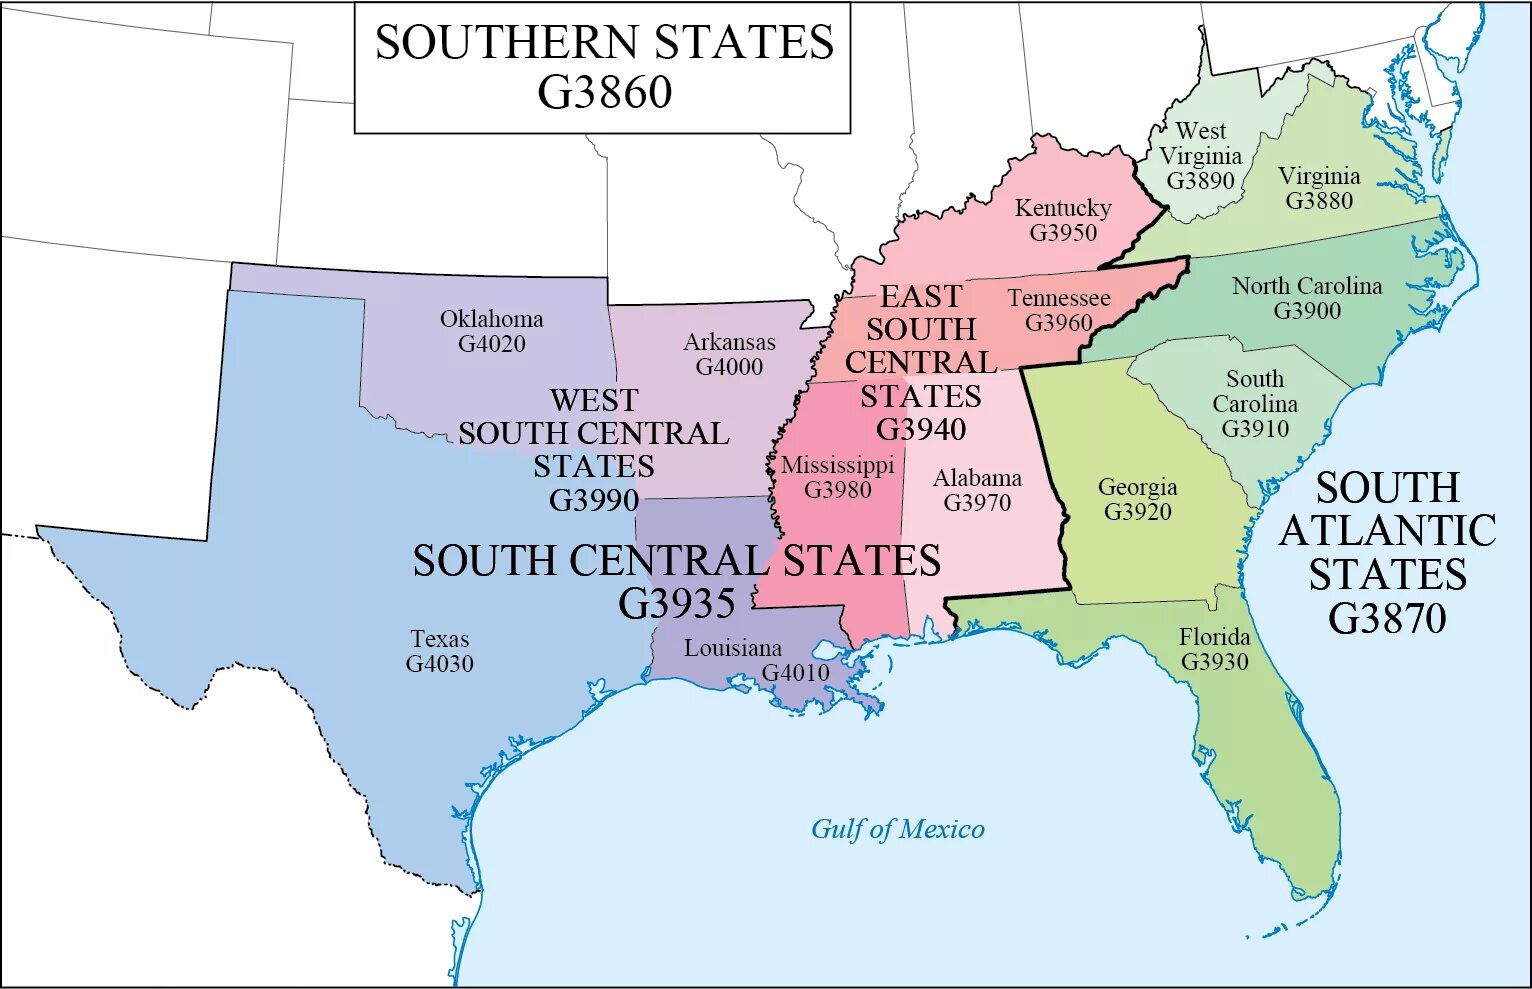 Southern States of the USA. The South Region of the USA. Южные штаты США.